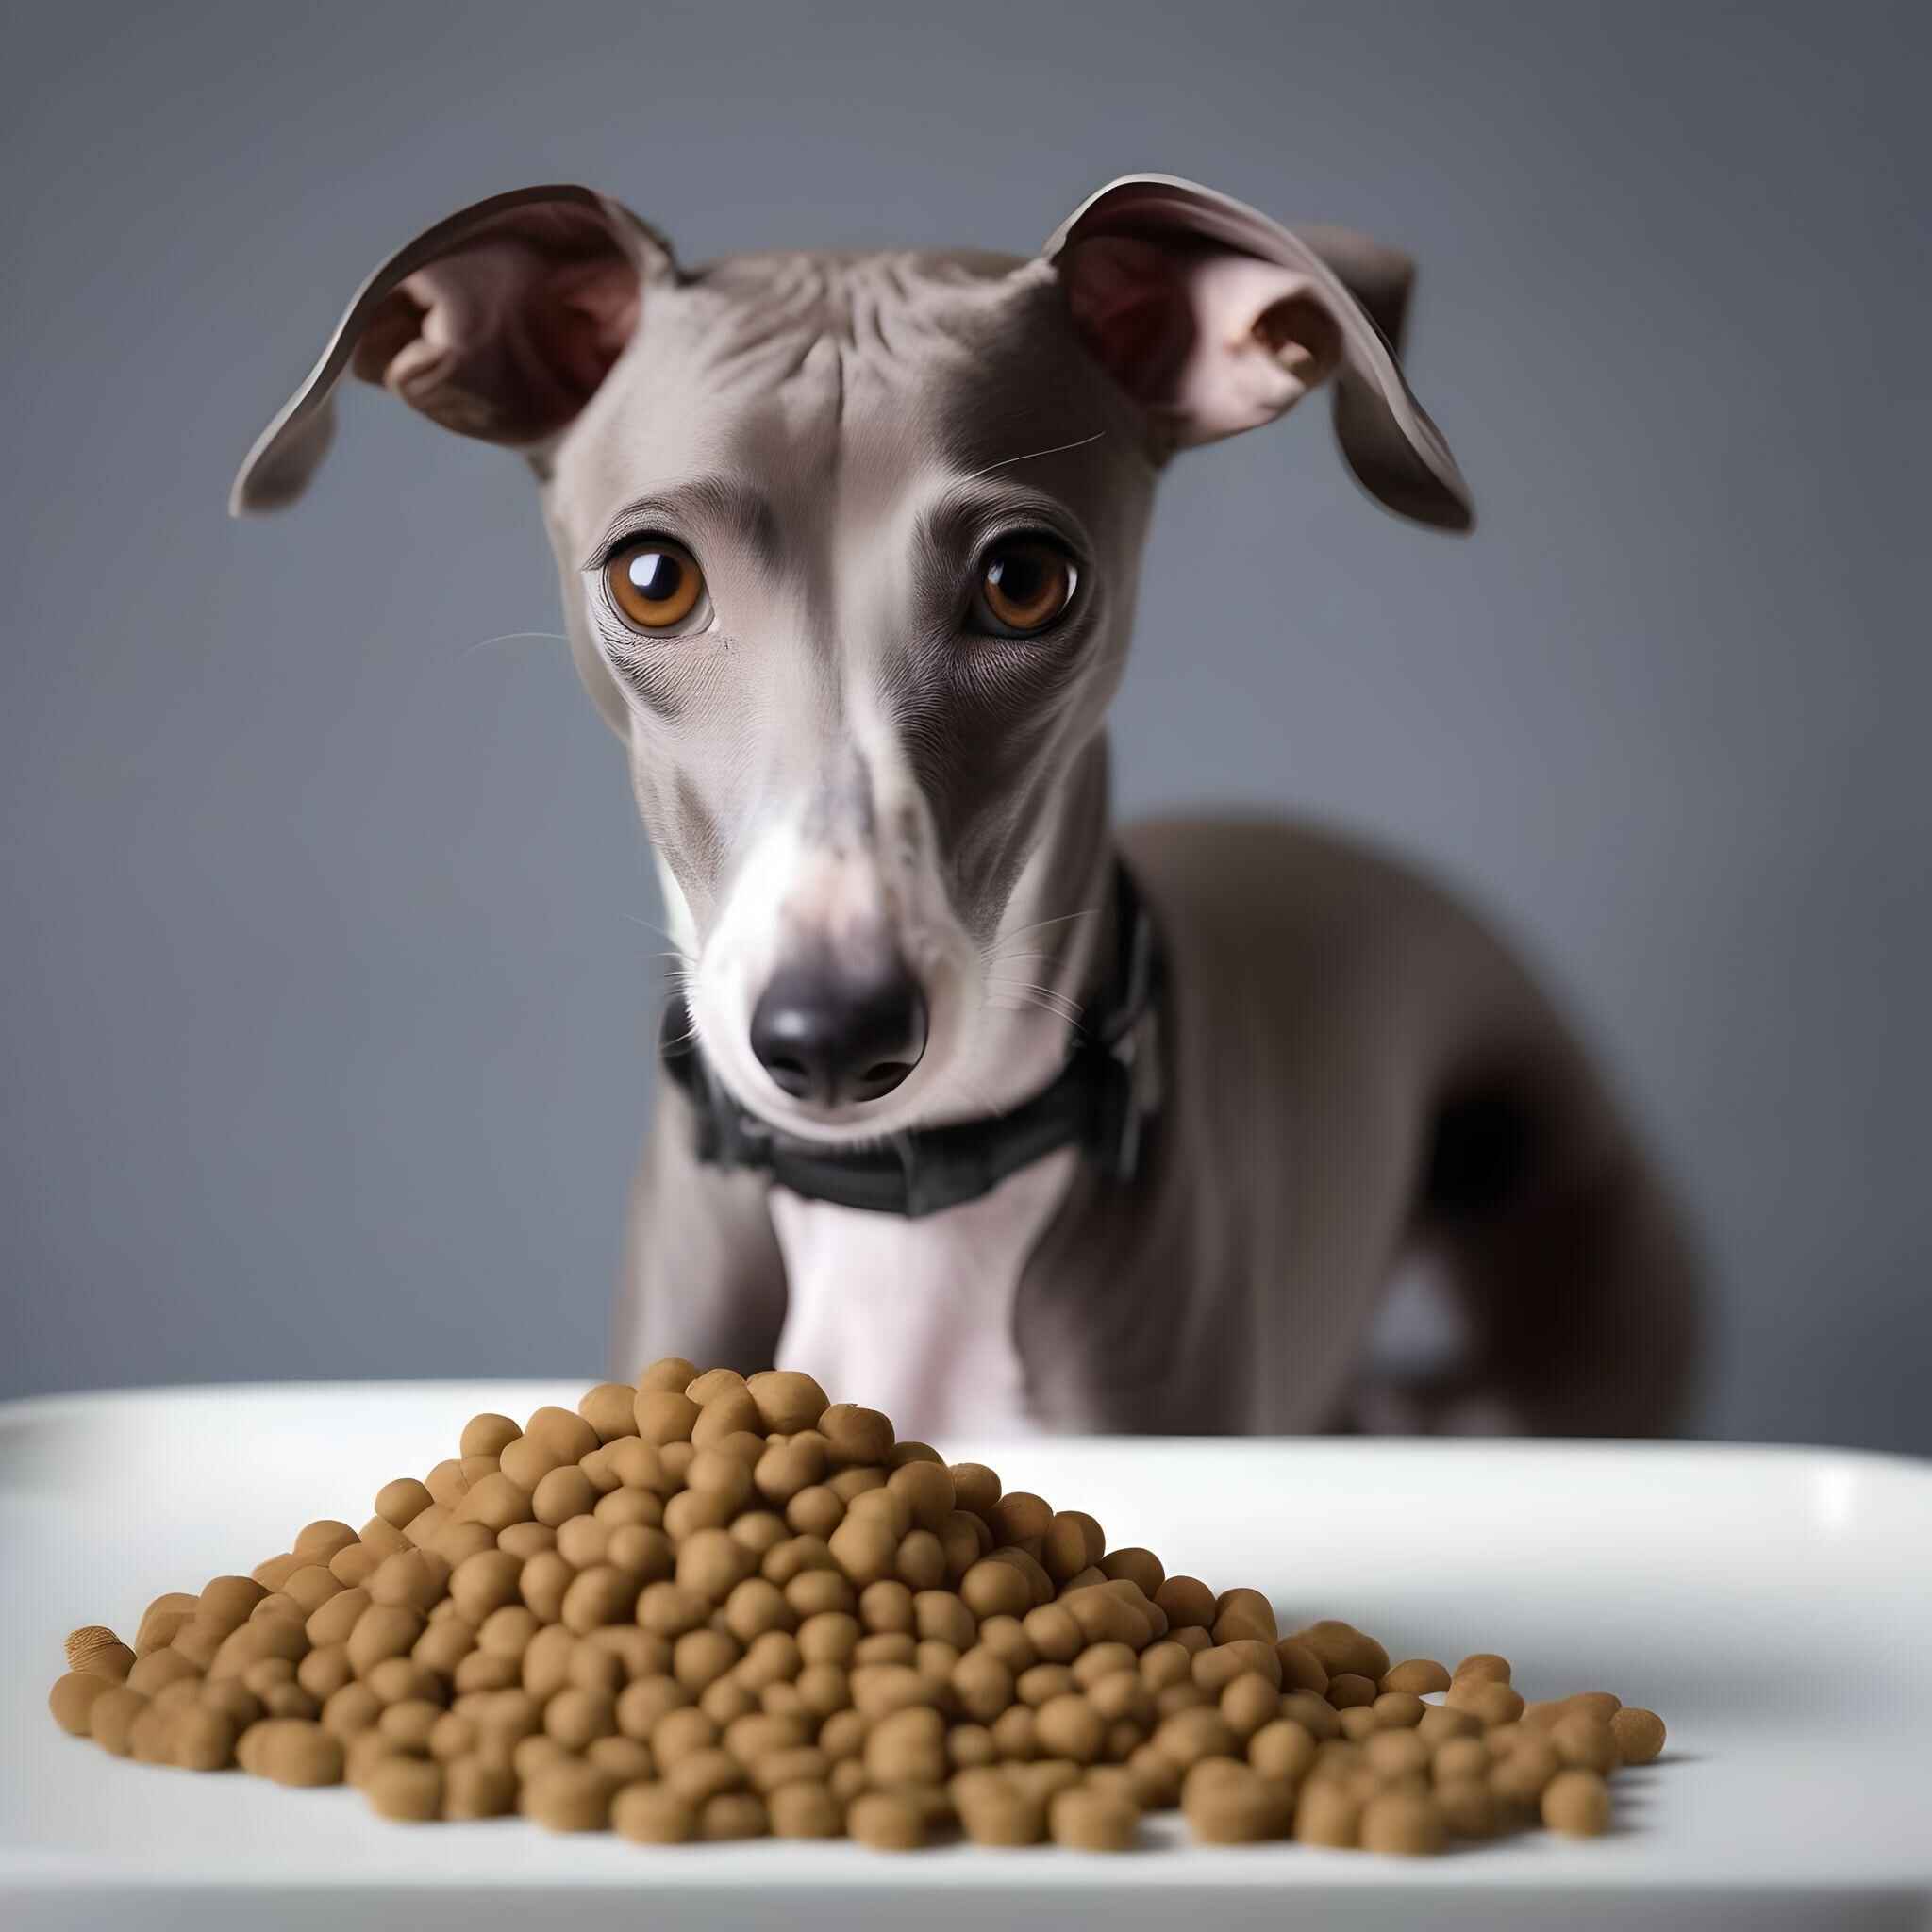 Best Dog Food for Italian Greyhounds